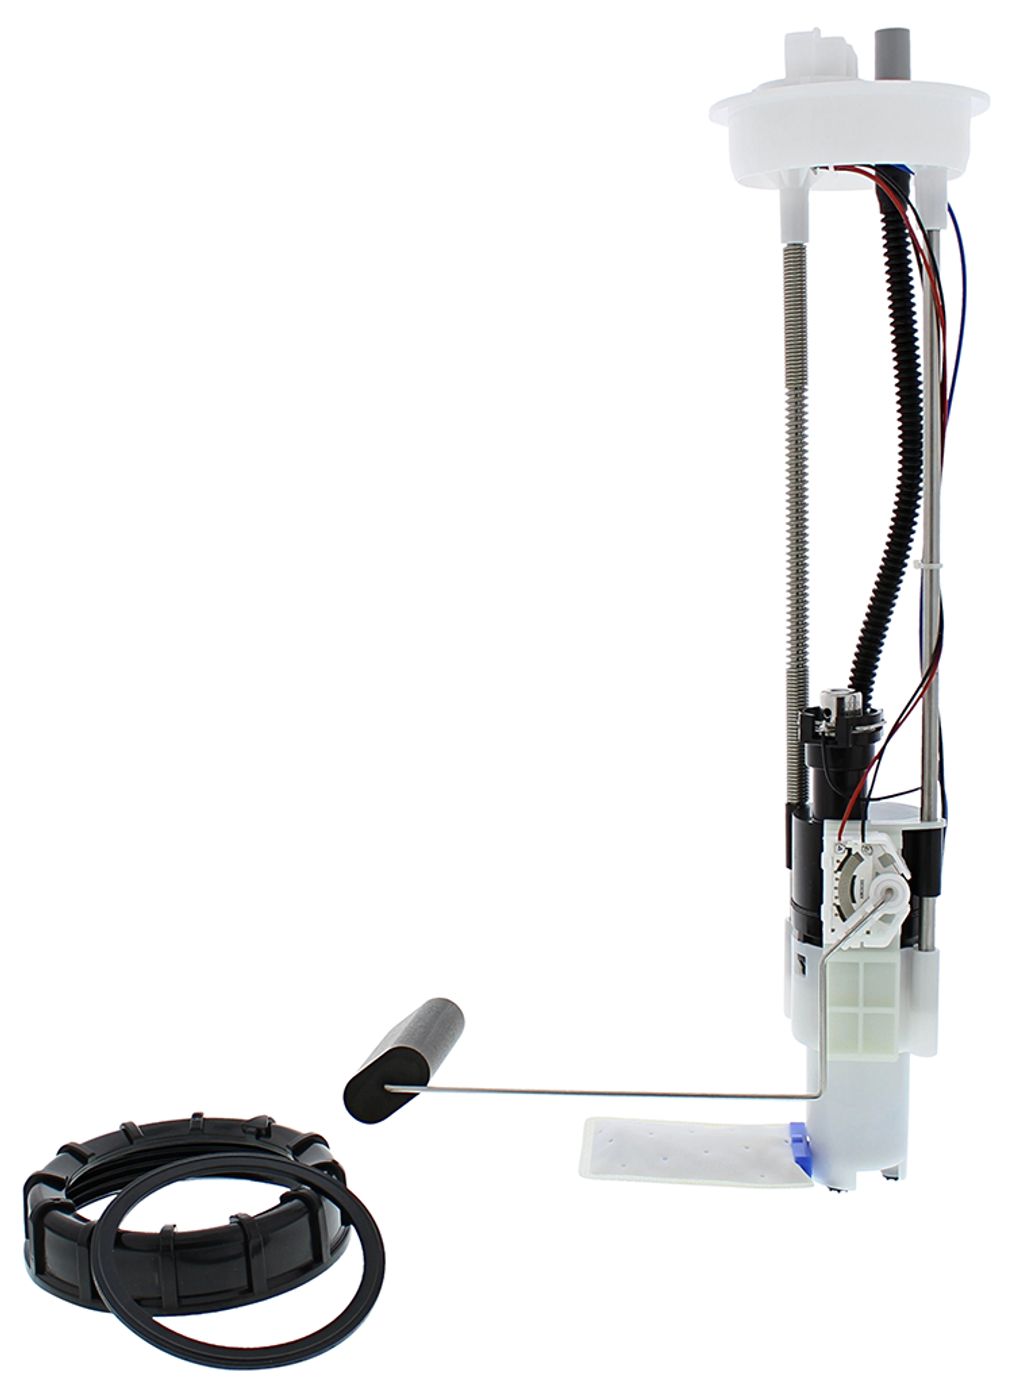 Wrp Fuel Pump Modules - WRP471013 image